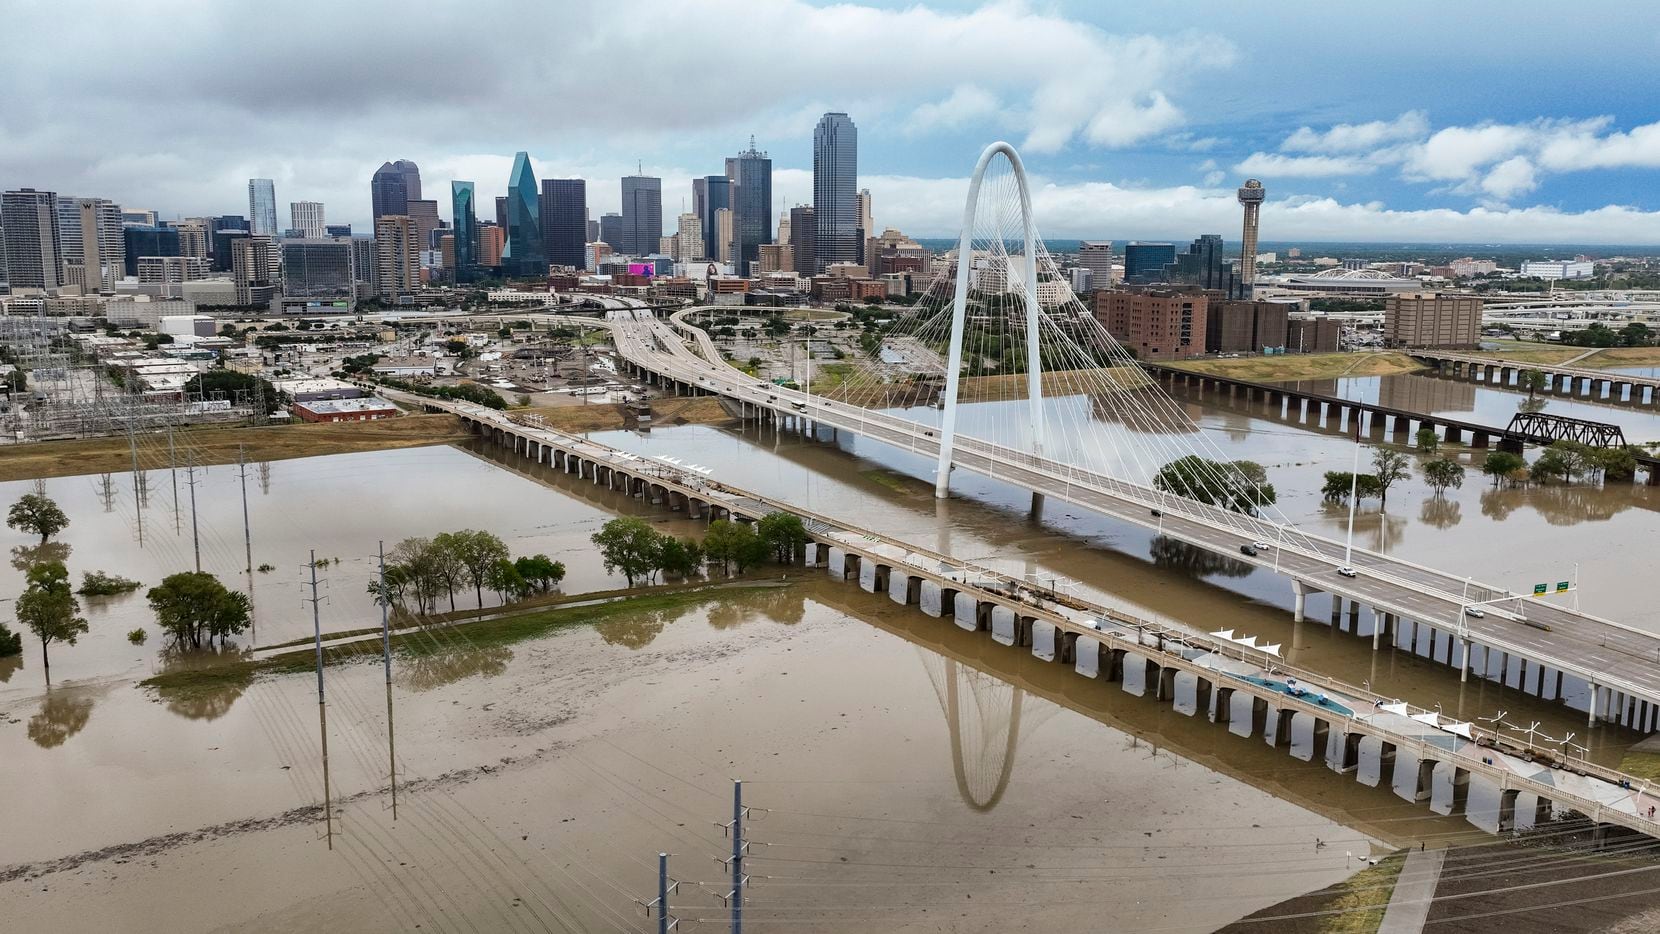 Trinity River in Dallas hit 38.64 feet early Tuesday morning. The river is shown here in an...